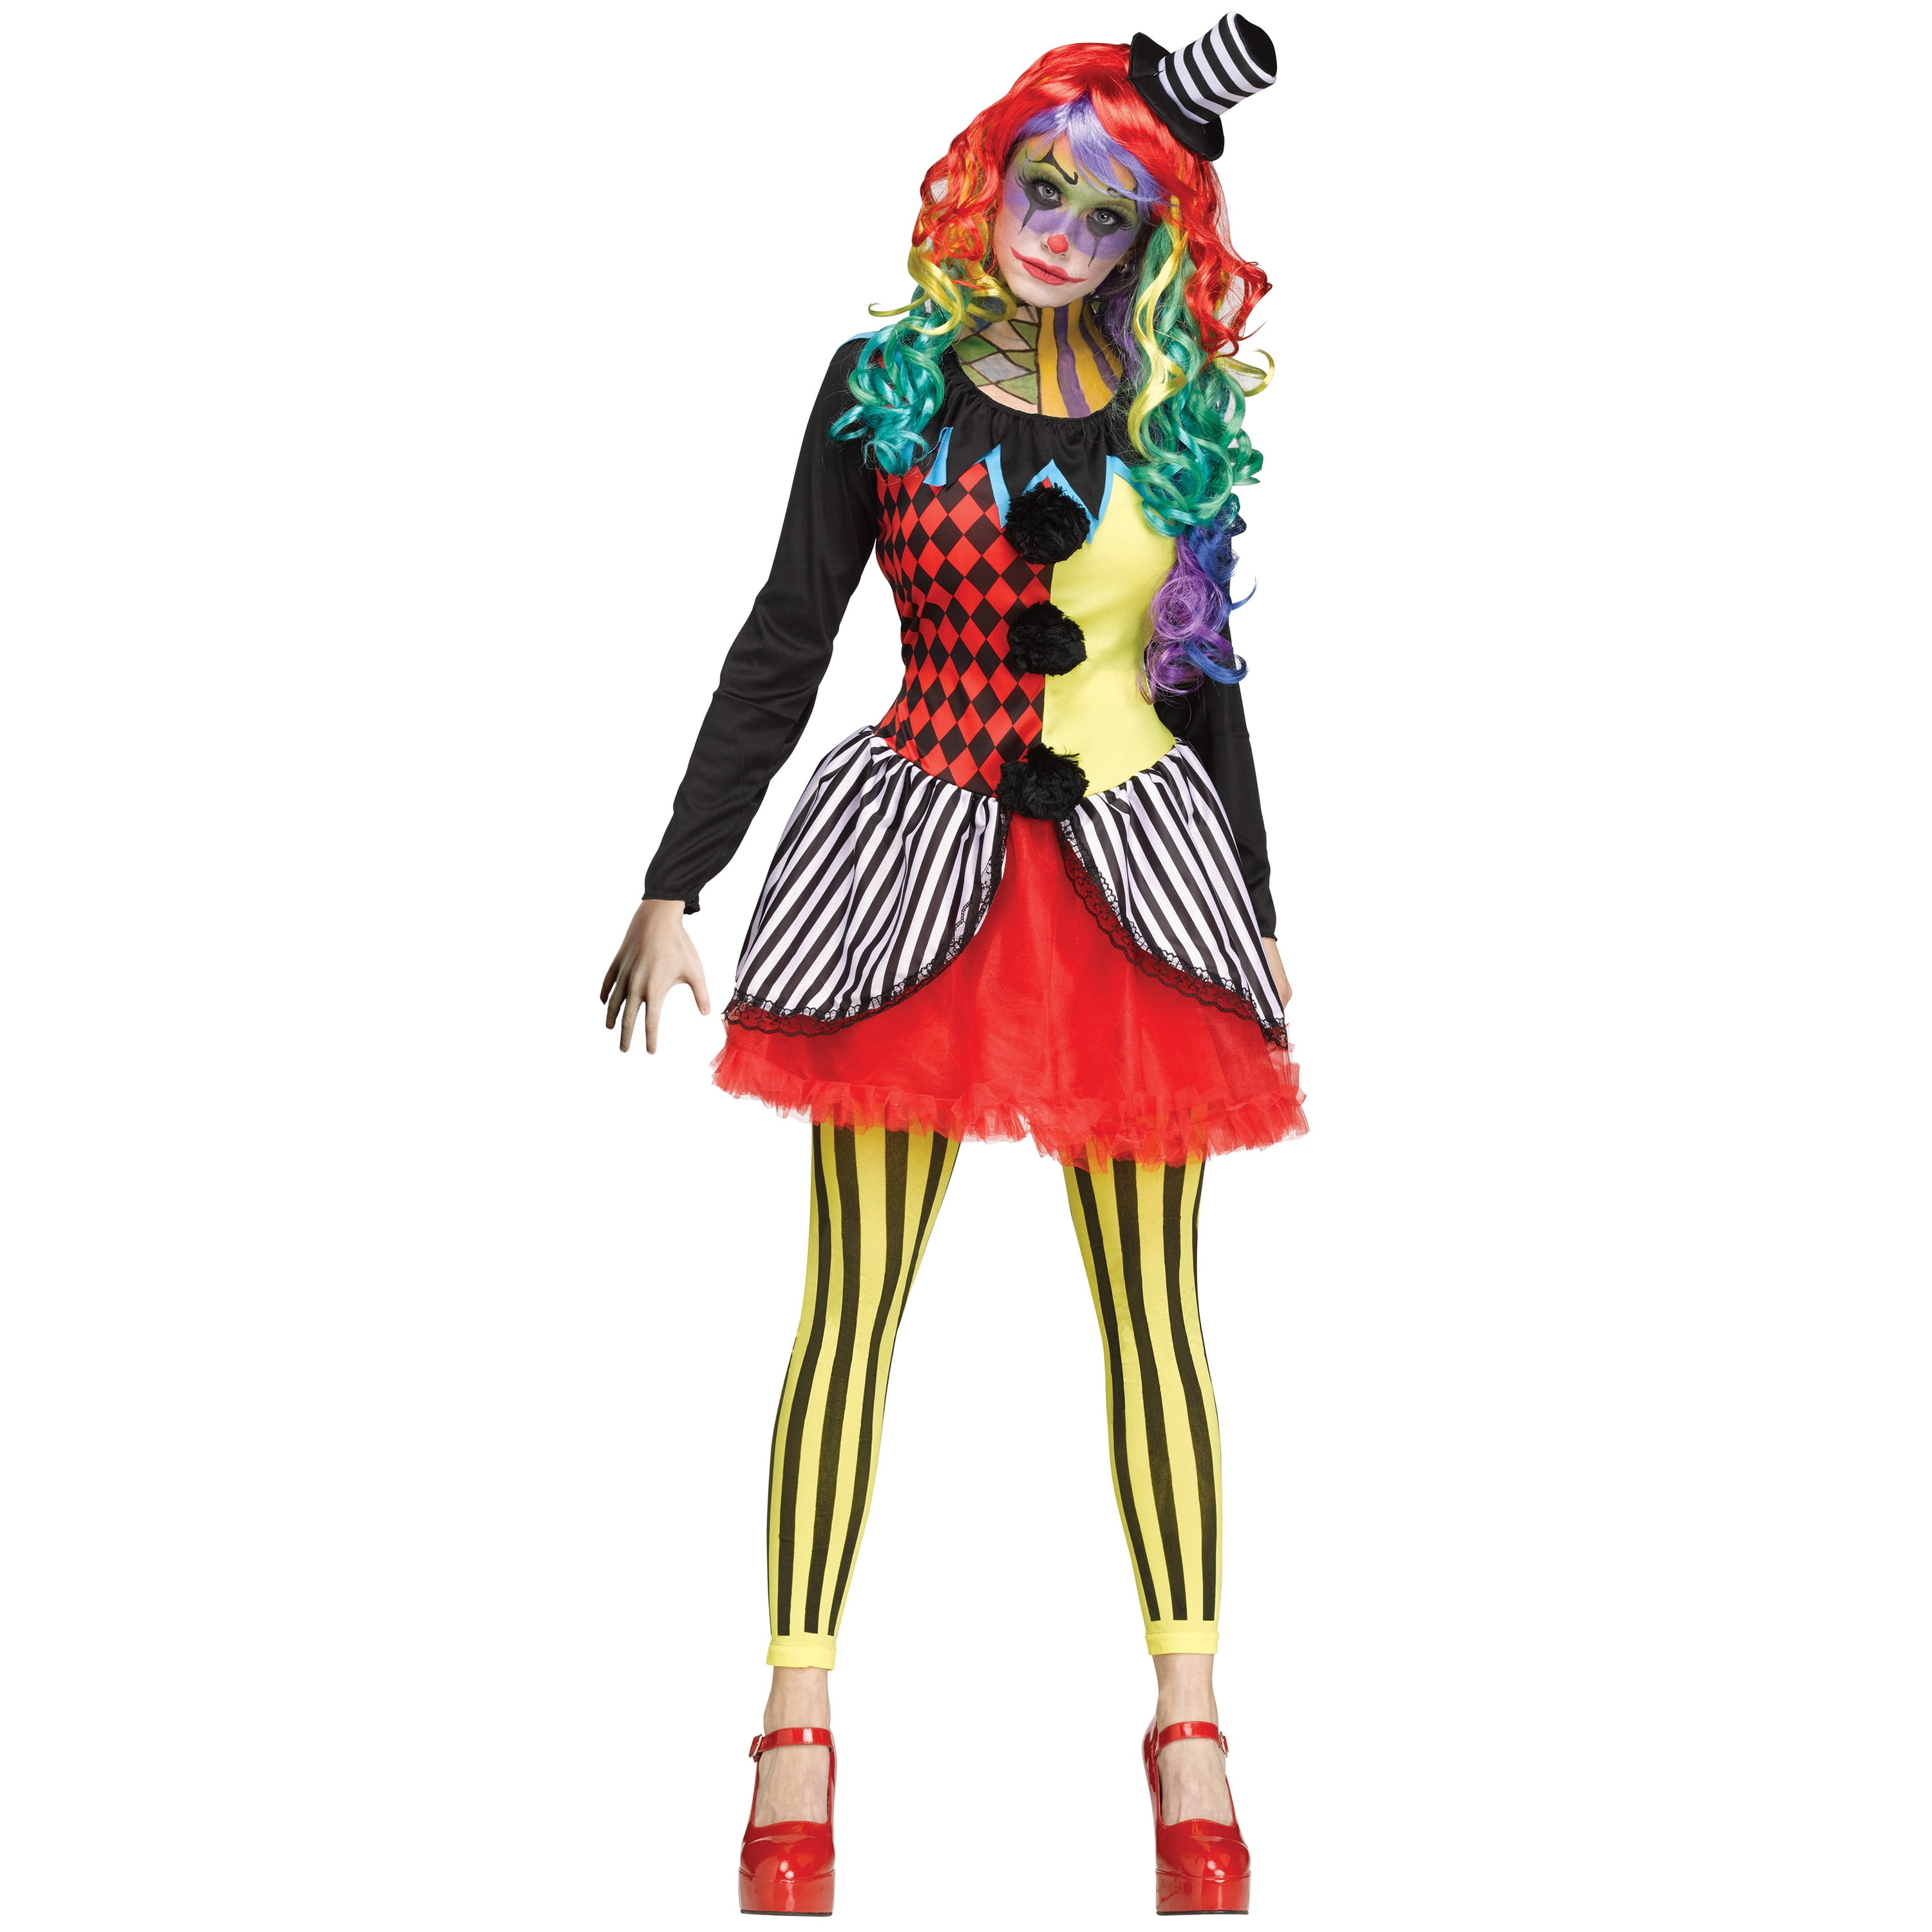 an adult dressed as a freakshow clown